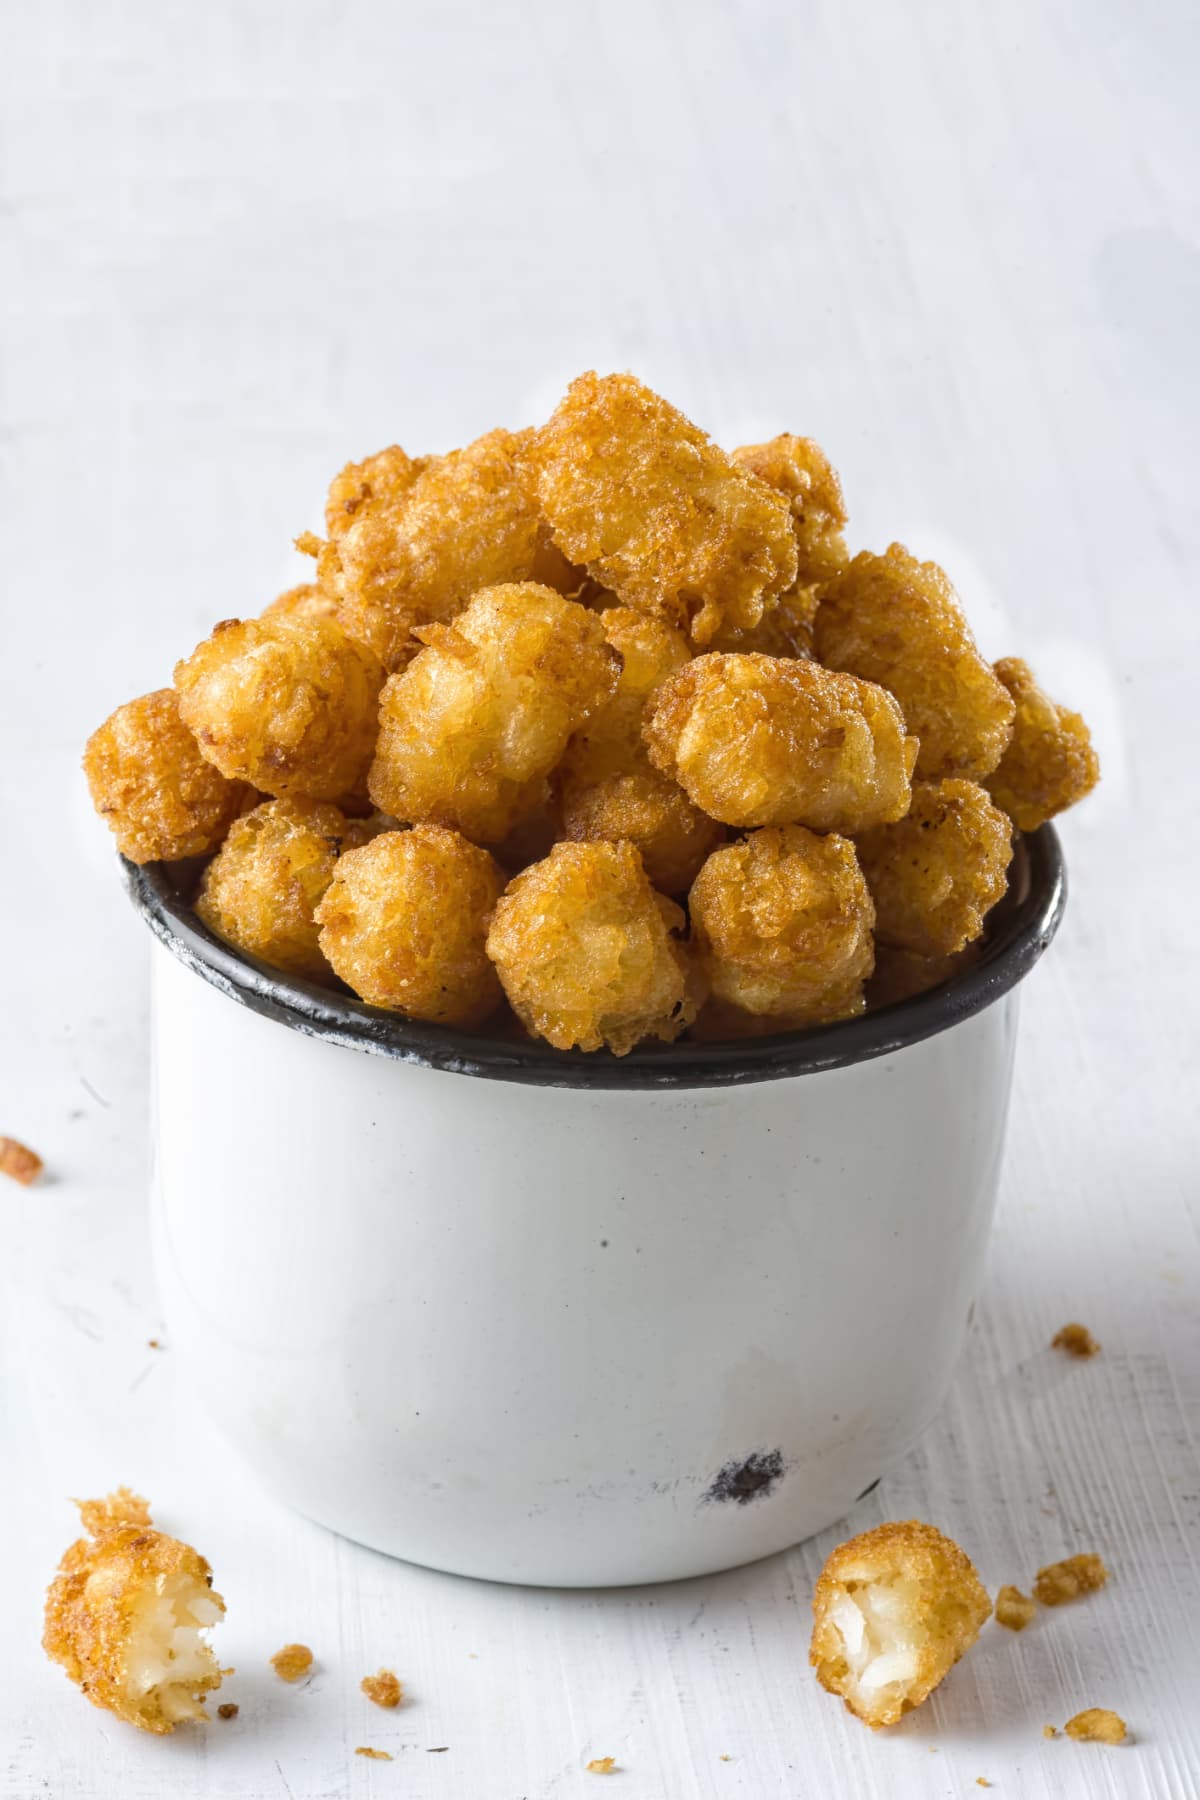 Container heaped full of tater tots